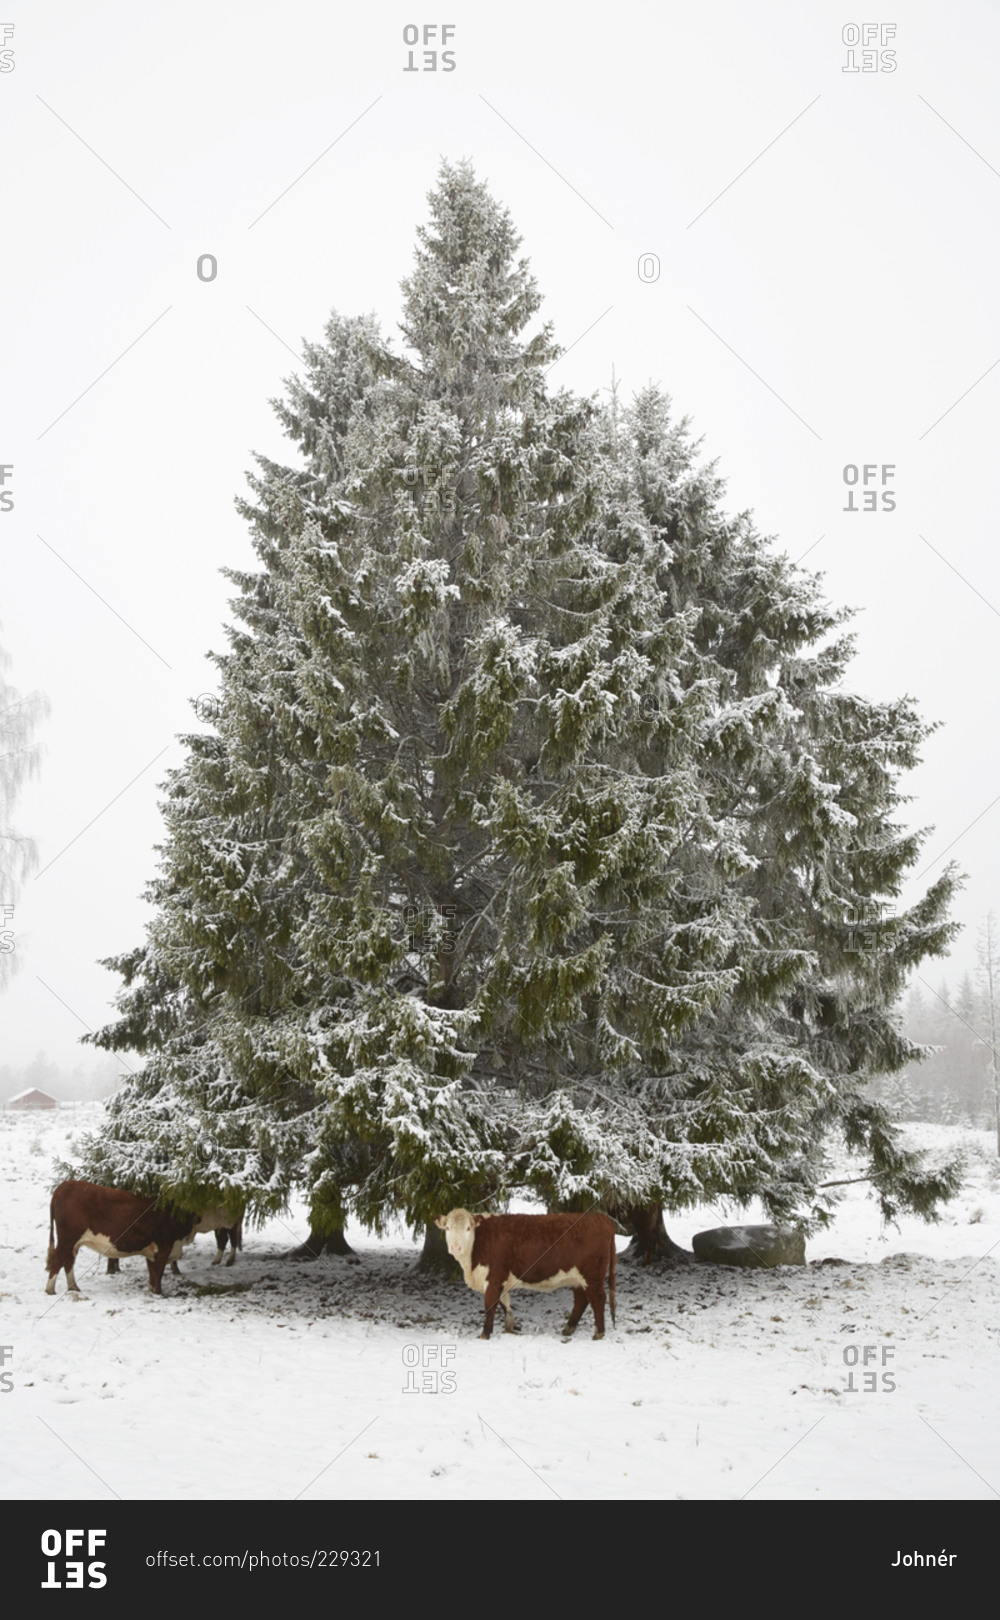 Cows by a tree in winter